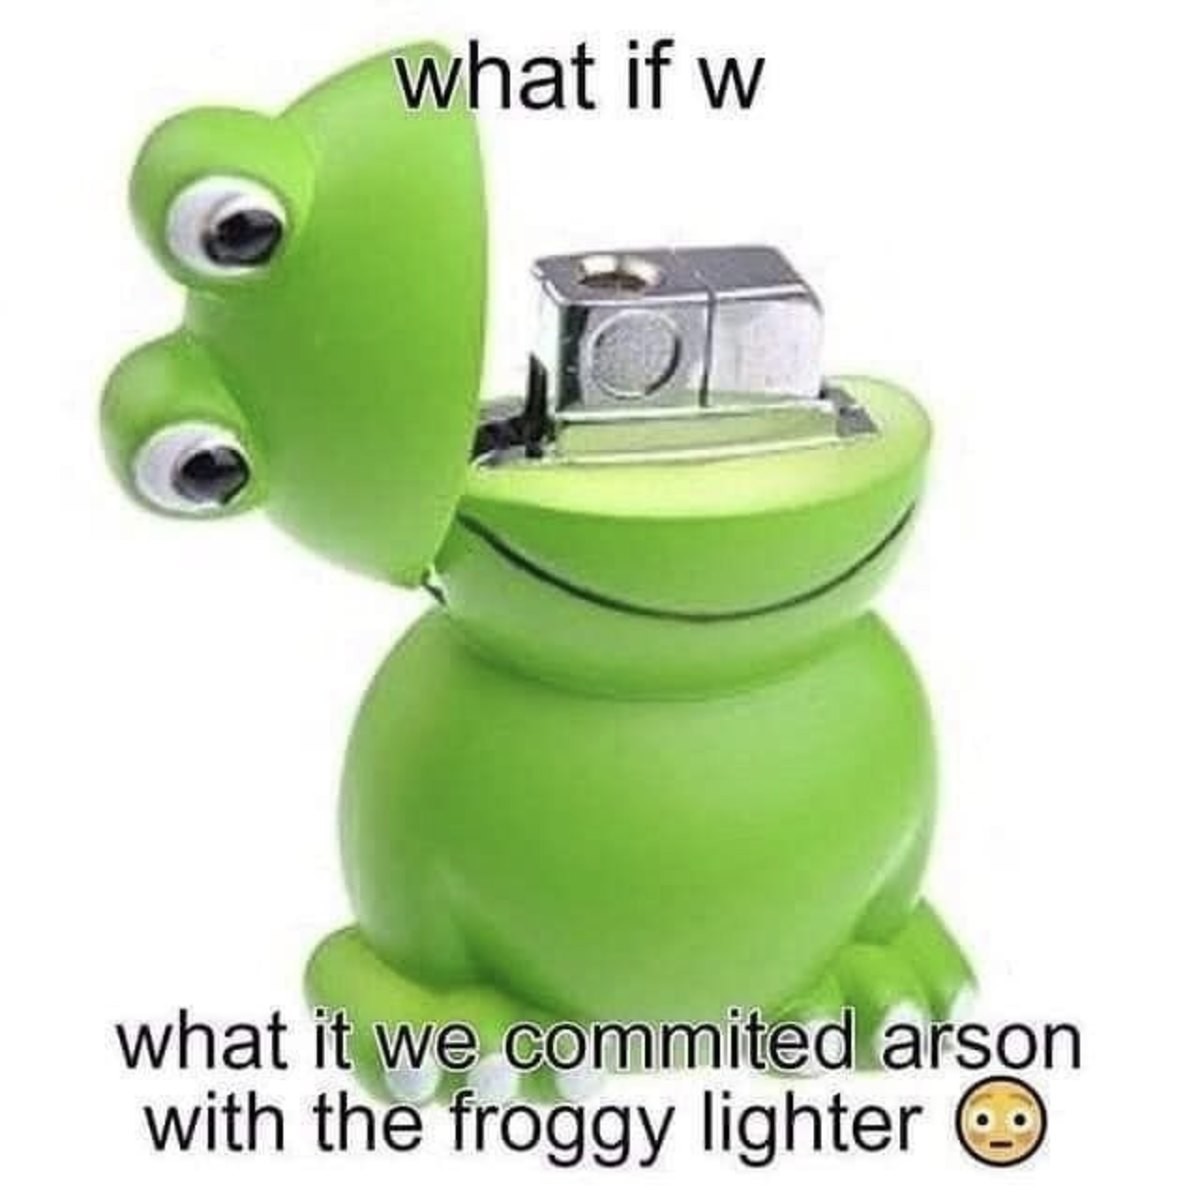 Frogghey. .. that's a good lighter